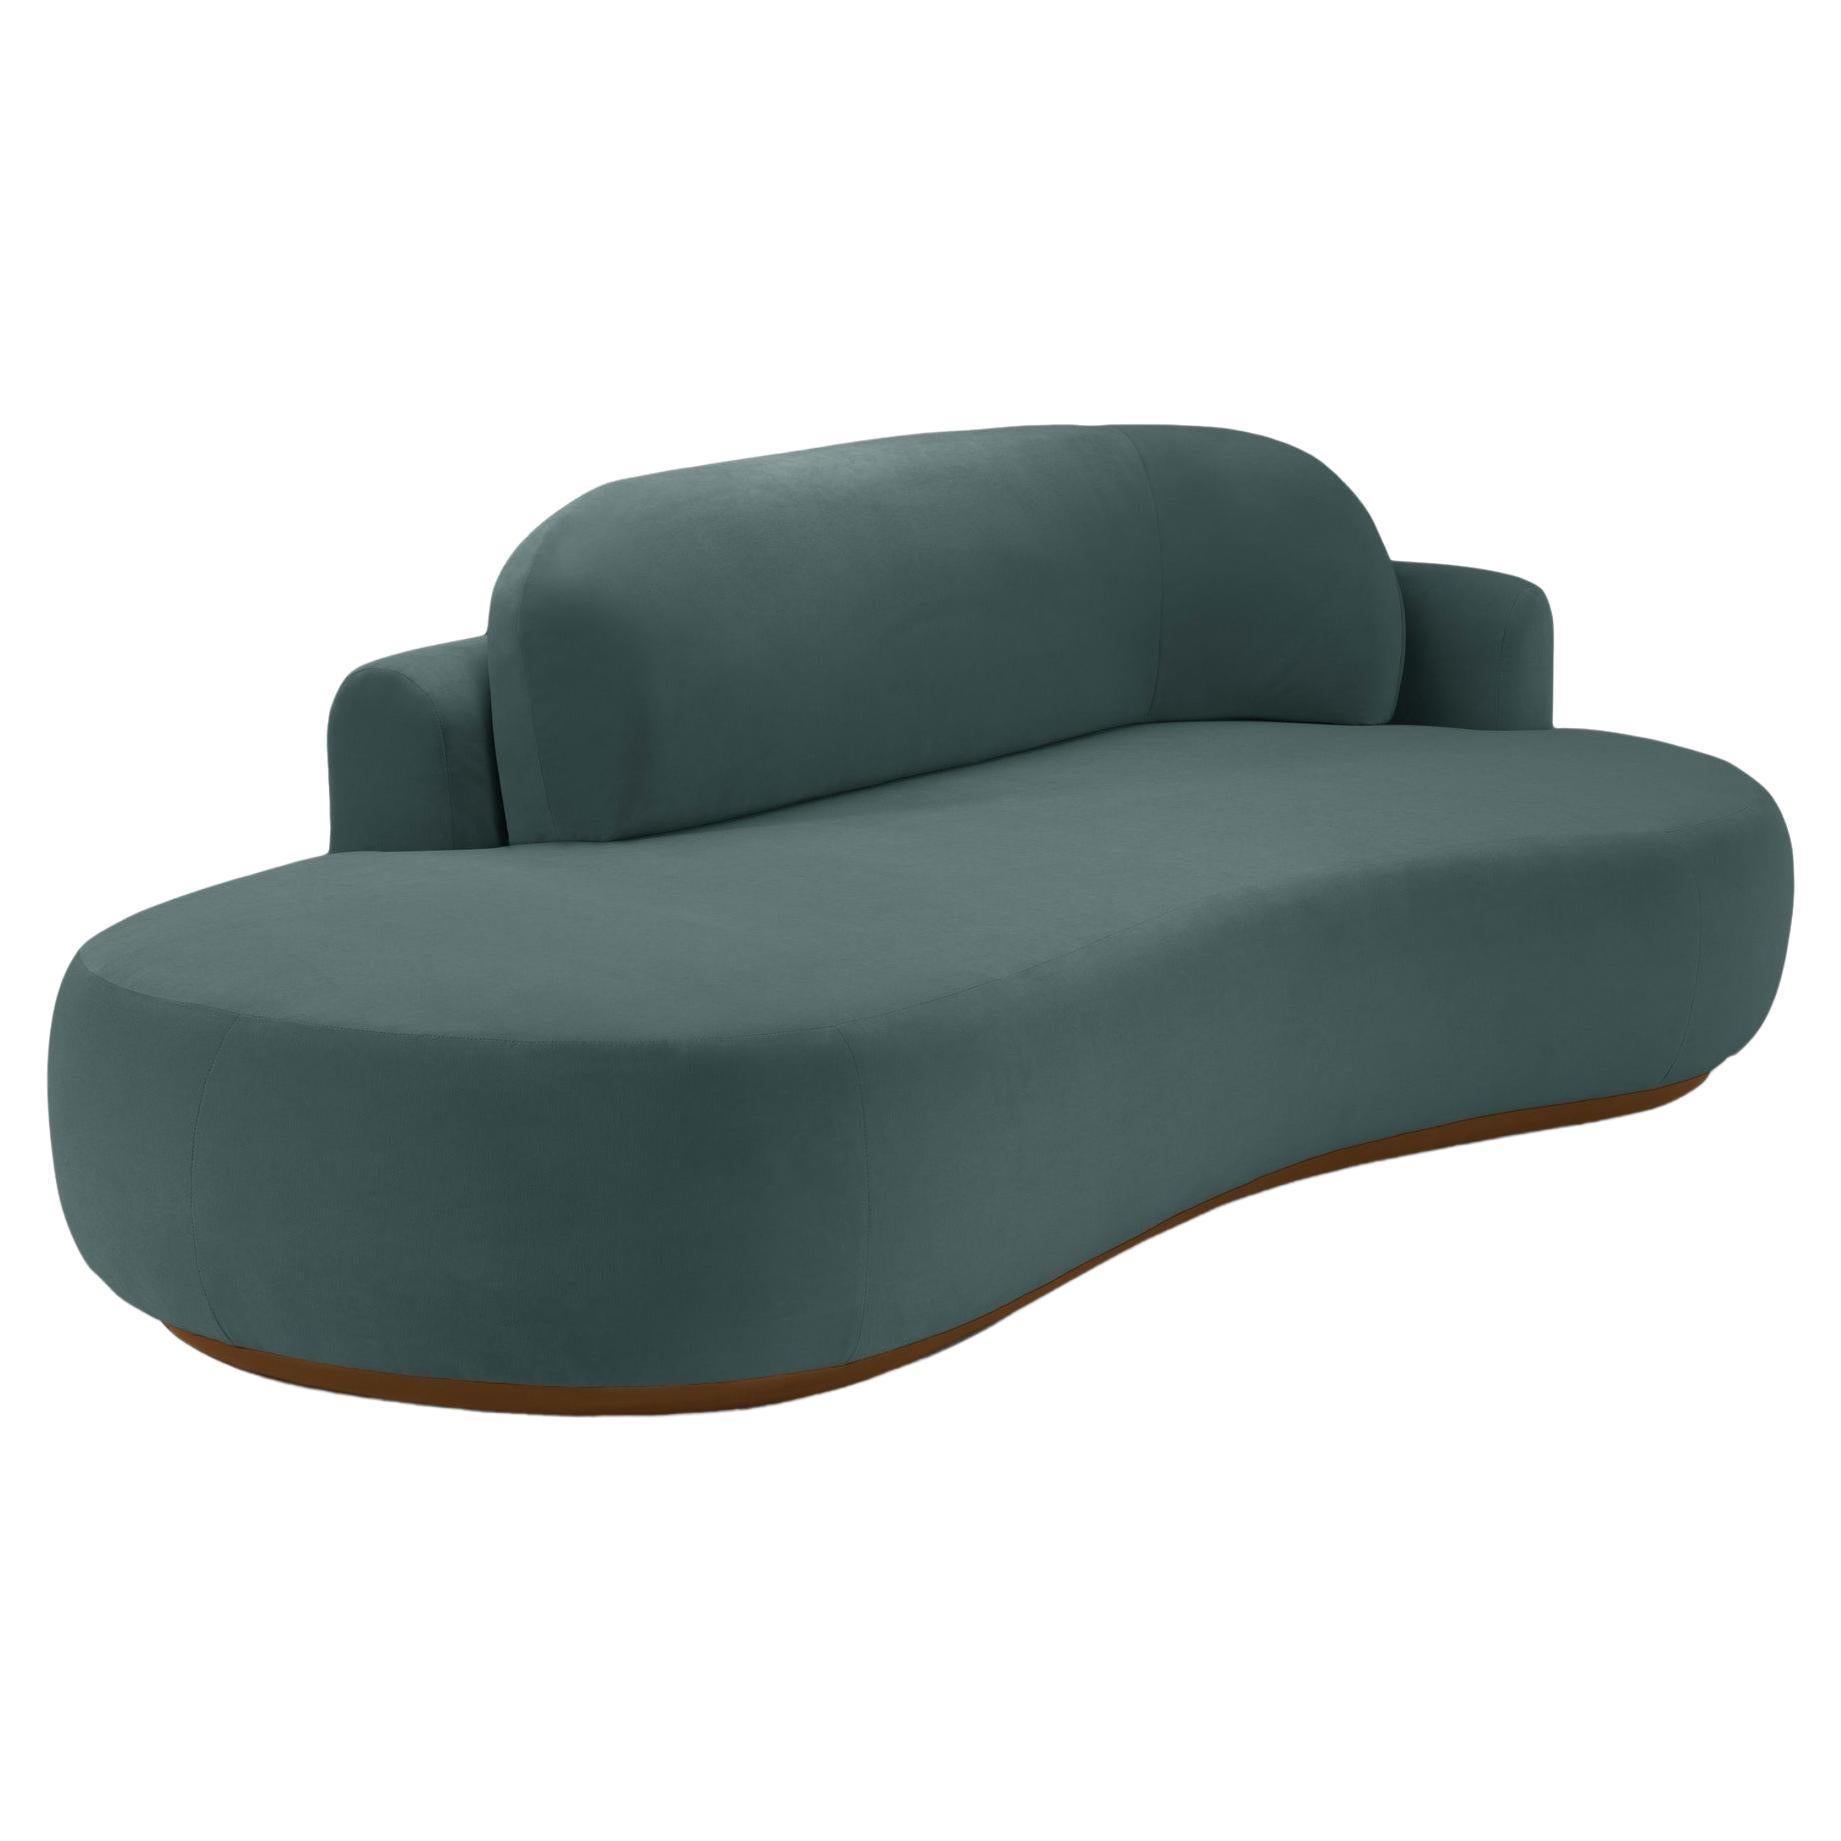 Naked Curved Sofa Single with Beech Ash-056-1 and Teal For Sale